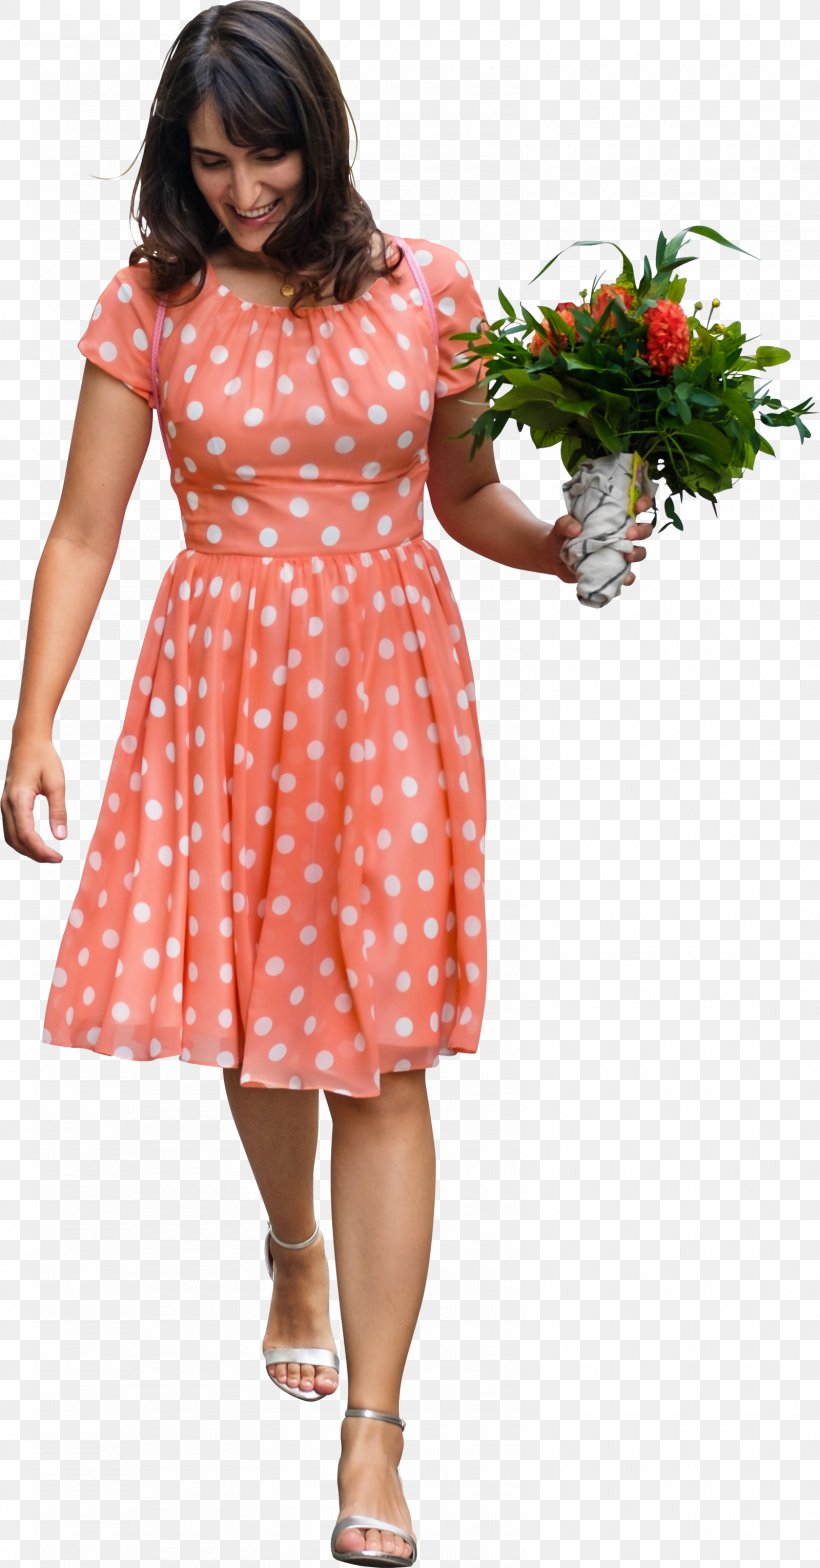 Walking Clipping Path, PNG, 1600x3061px, Walking, Child, Clipping Path, Clothing, Cocktail Dress Download Free